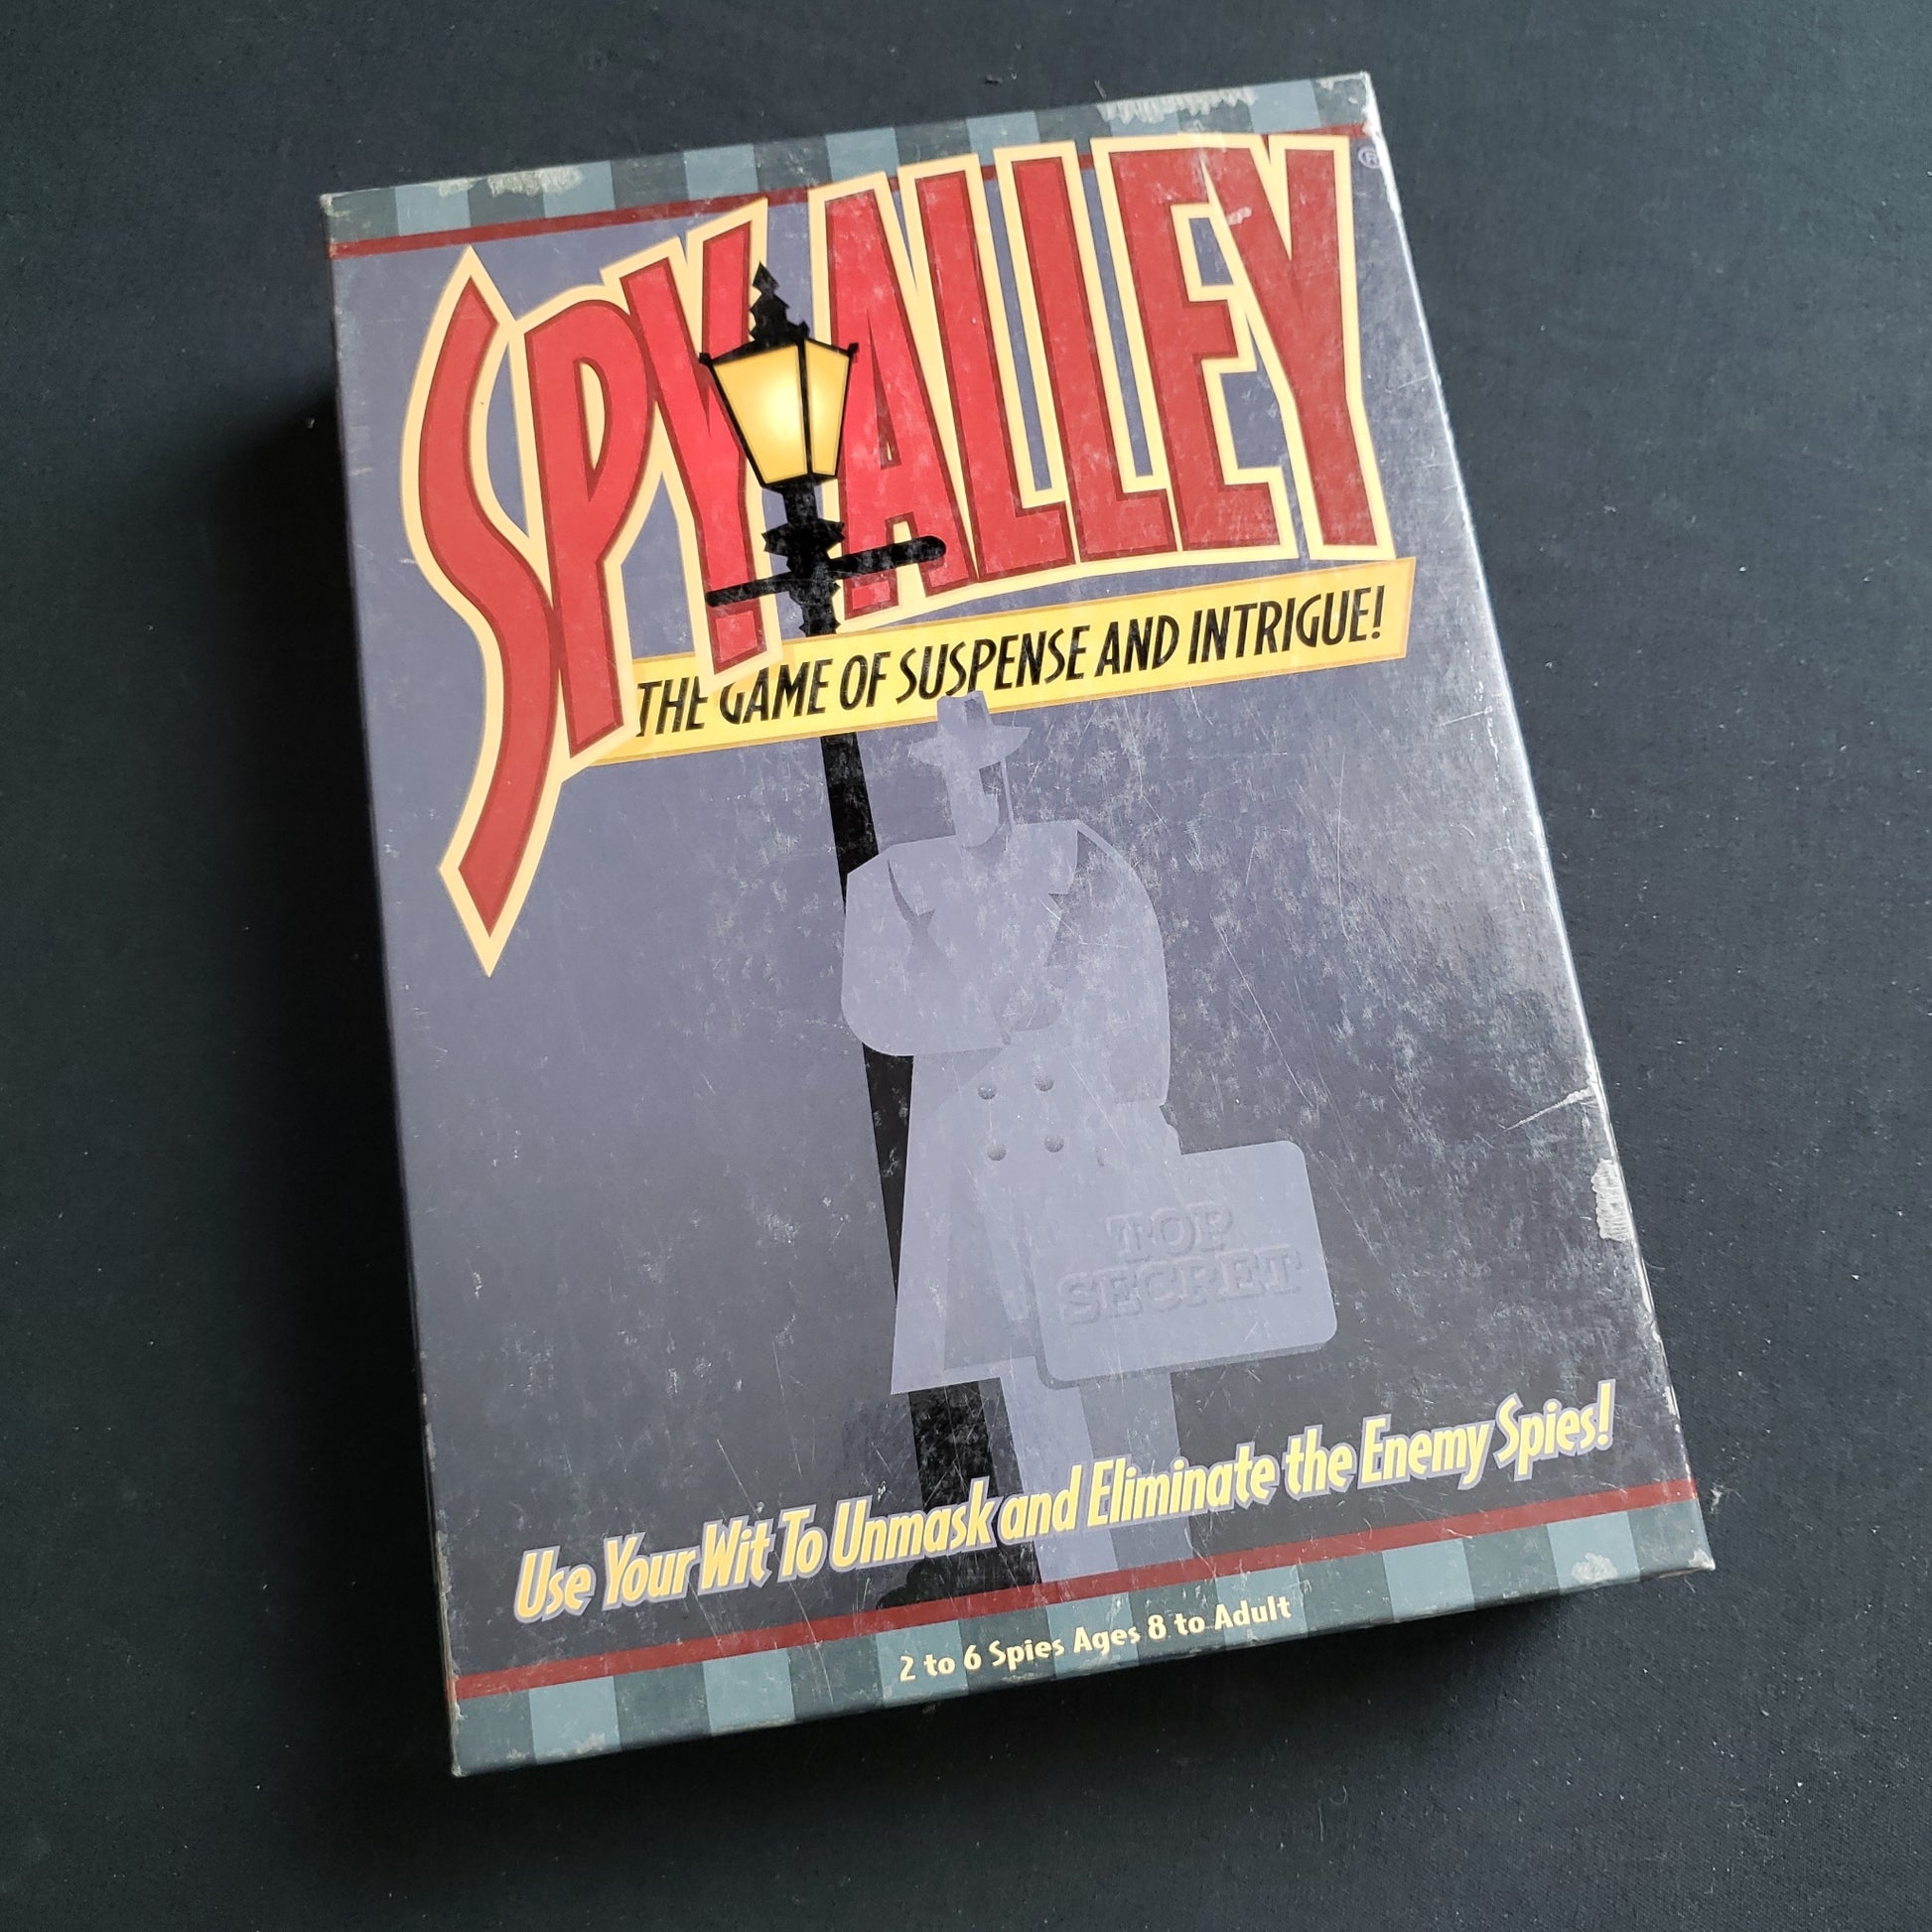 Image shows the front cover of the box of the Spy Alley board game